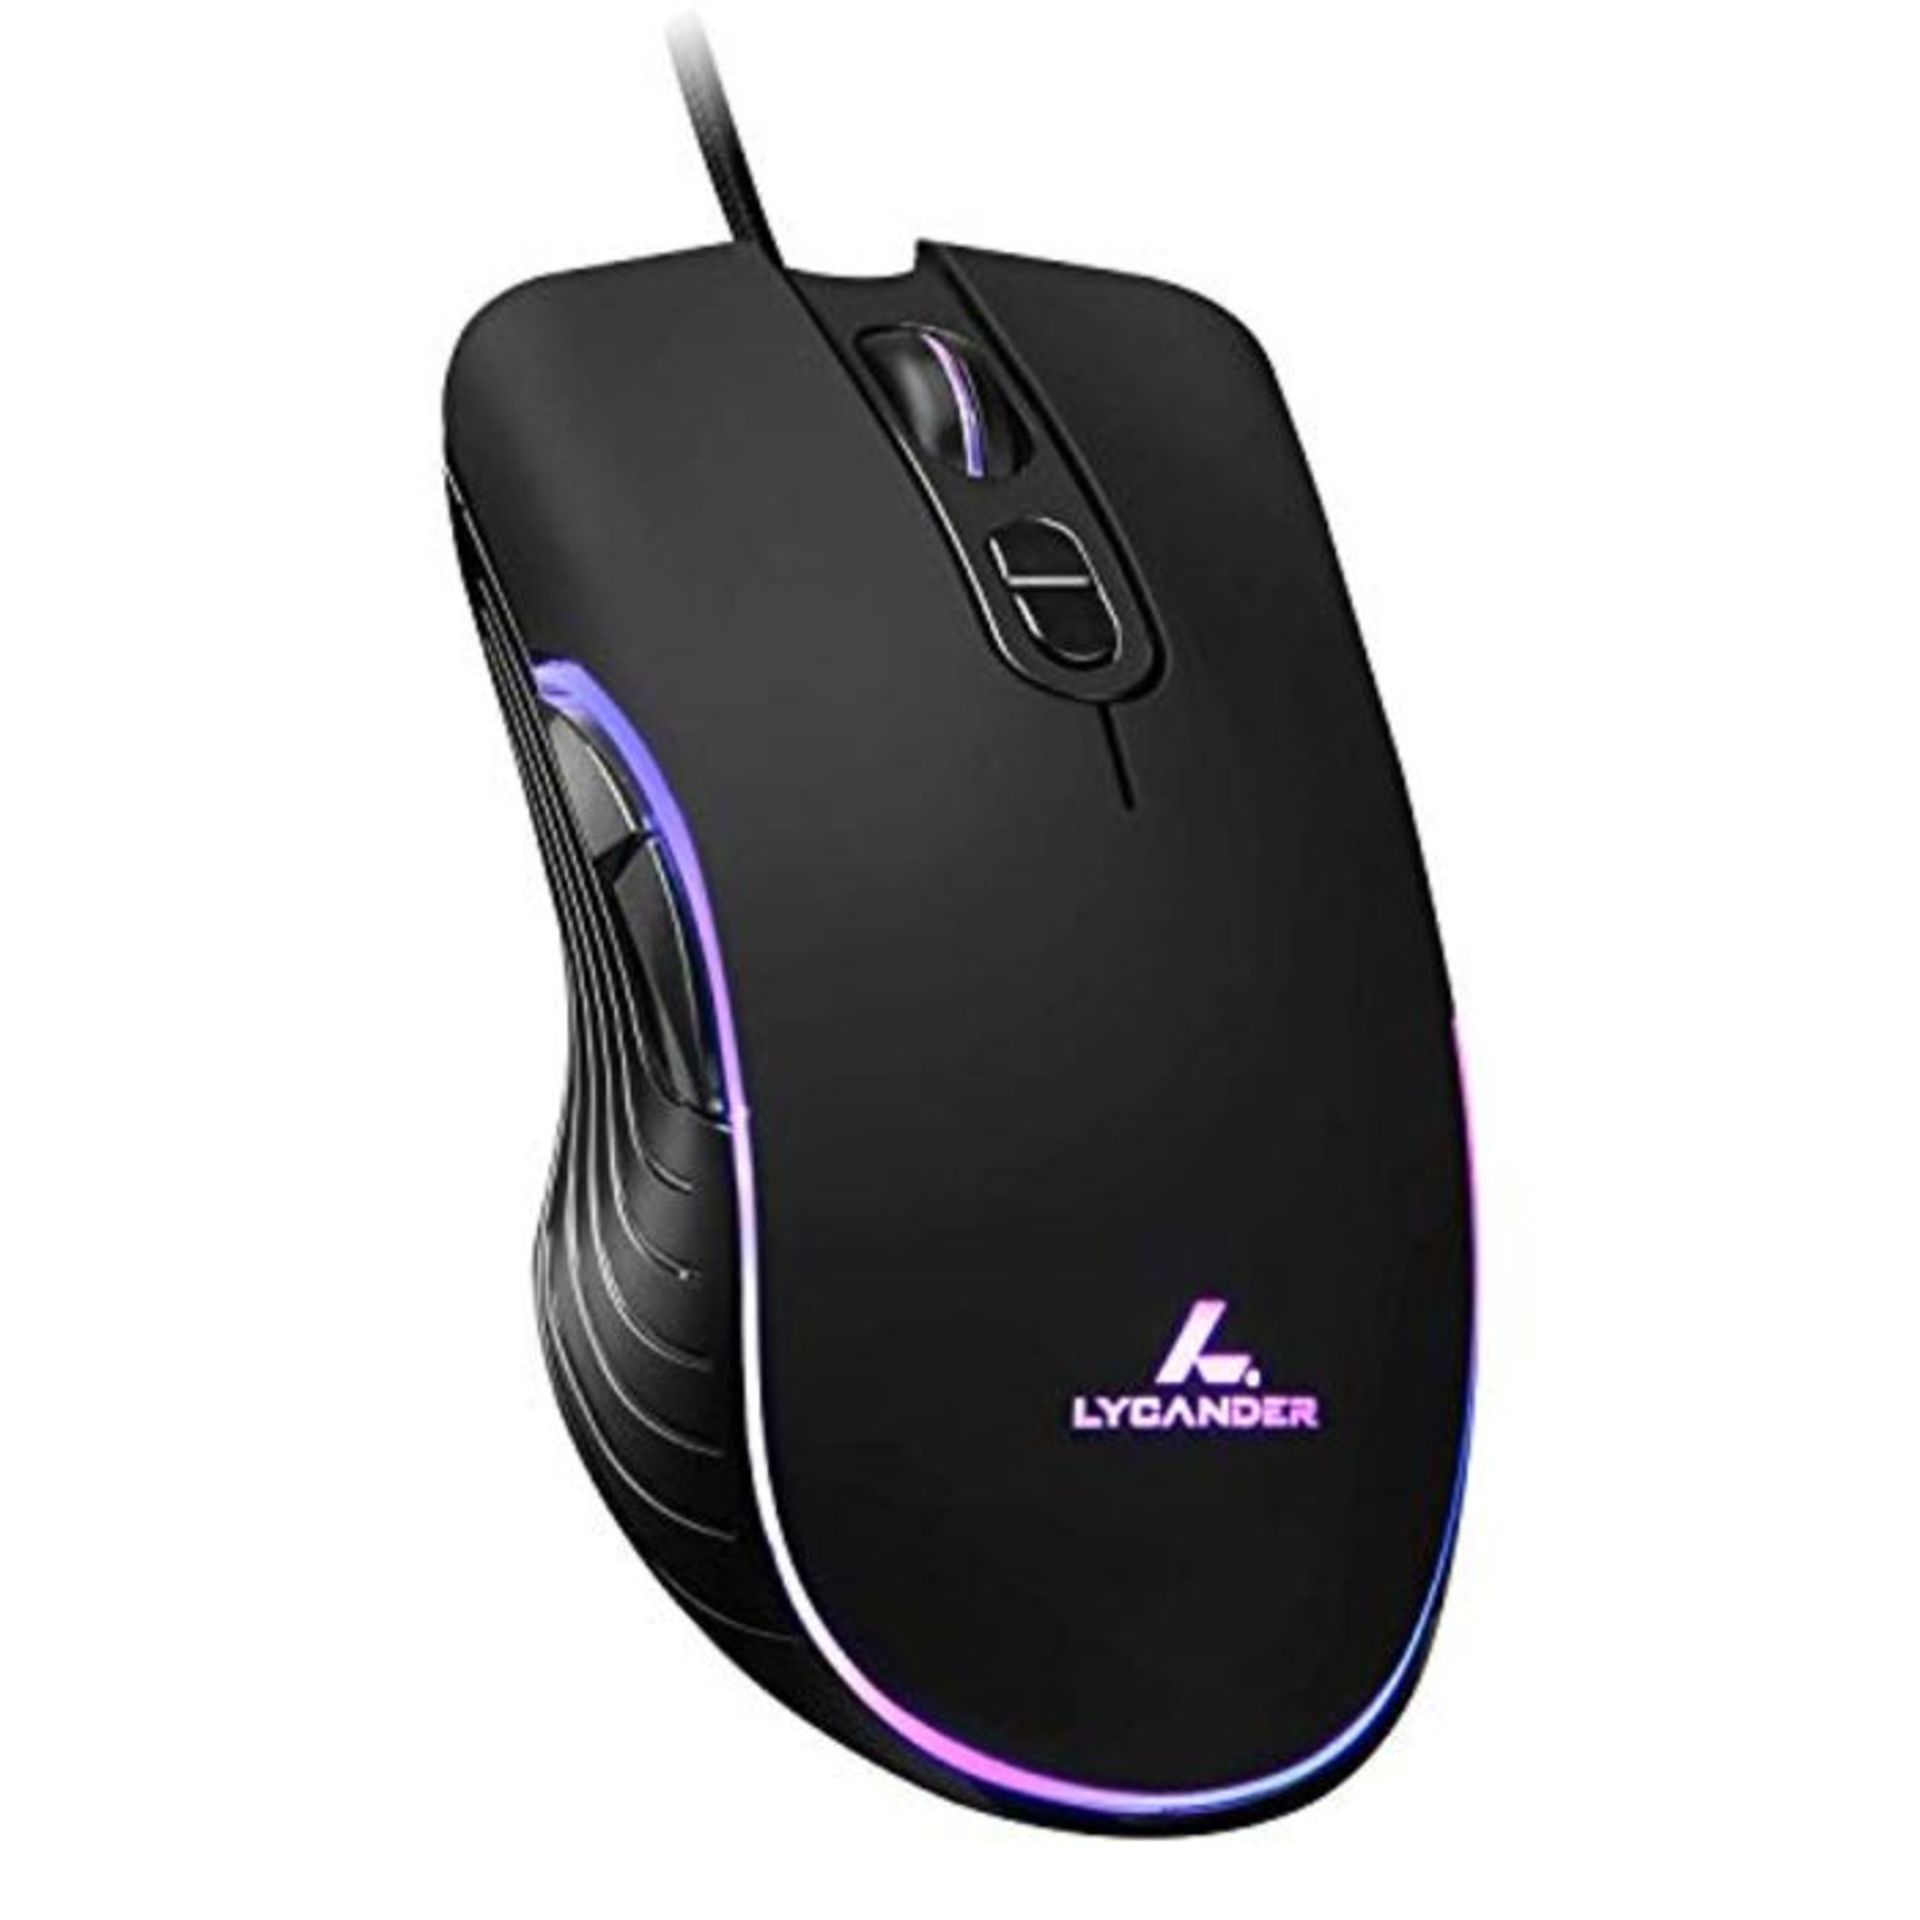 LYCANDER Gaming Mouse, Wired Optical USB Mice with Adjustable dpi up to 6400, 7 Button